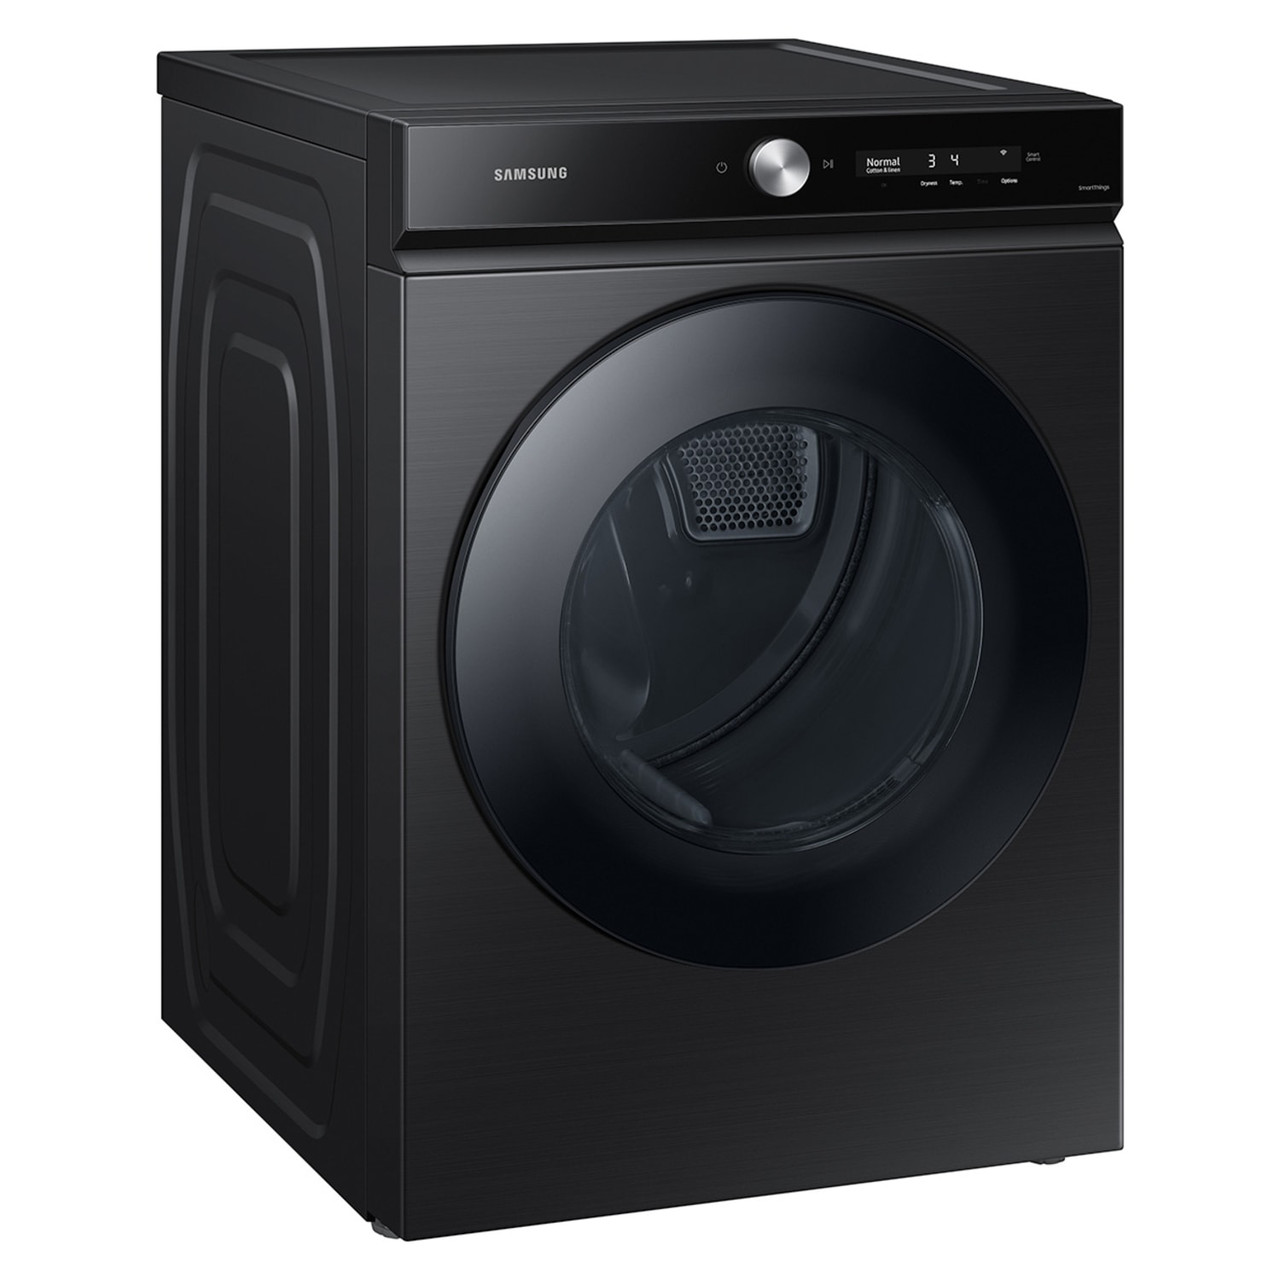 Samsung BESPOKE 7.6 cu. ft. Ultra Capacity Gas Dryer with Super Speed Dry and AI Powered Smart Dial in Brushed Black